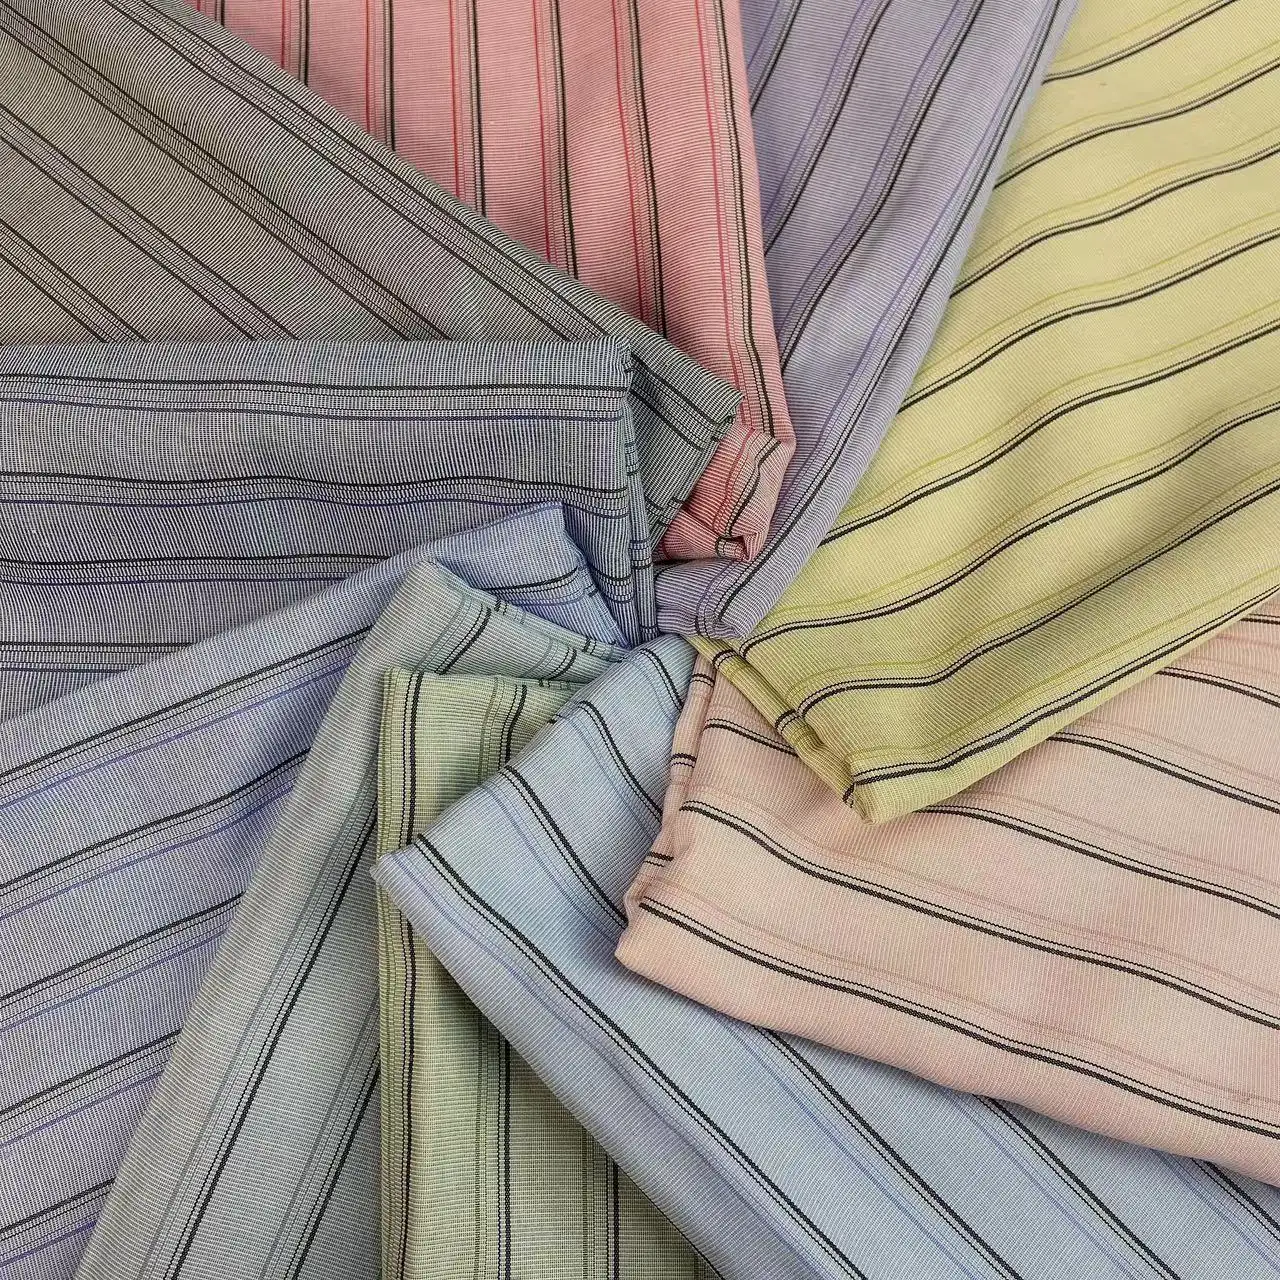 Soft Thin Pleated Polyester/rayon Crepe Shirt Fabric For Skirt Dresses Clothing